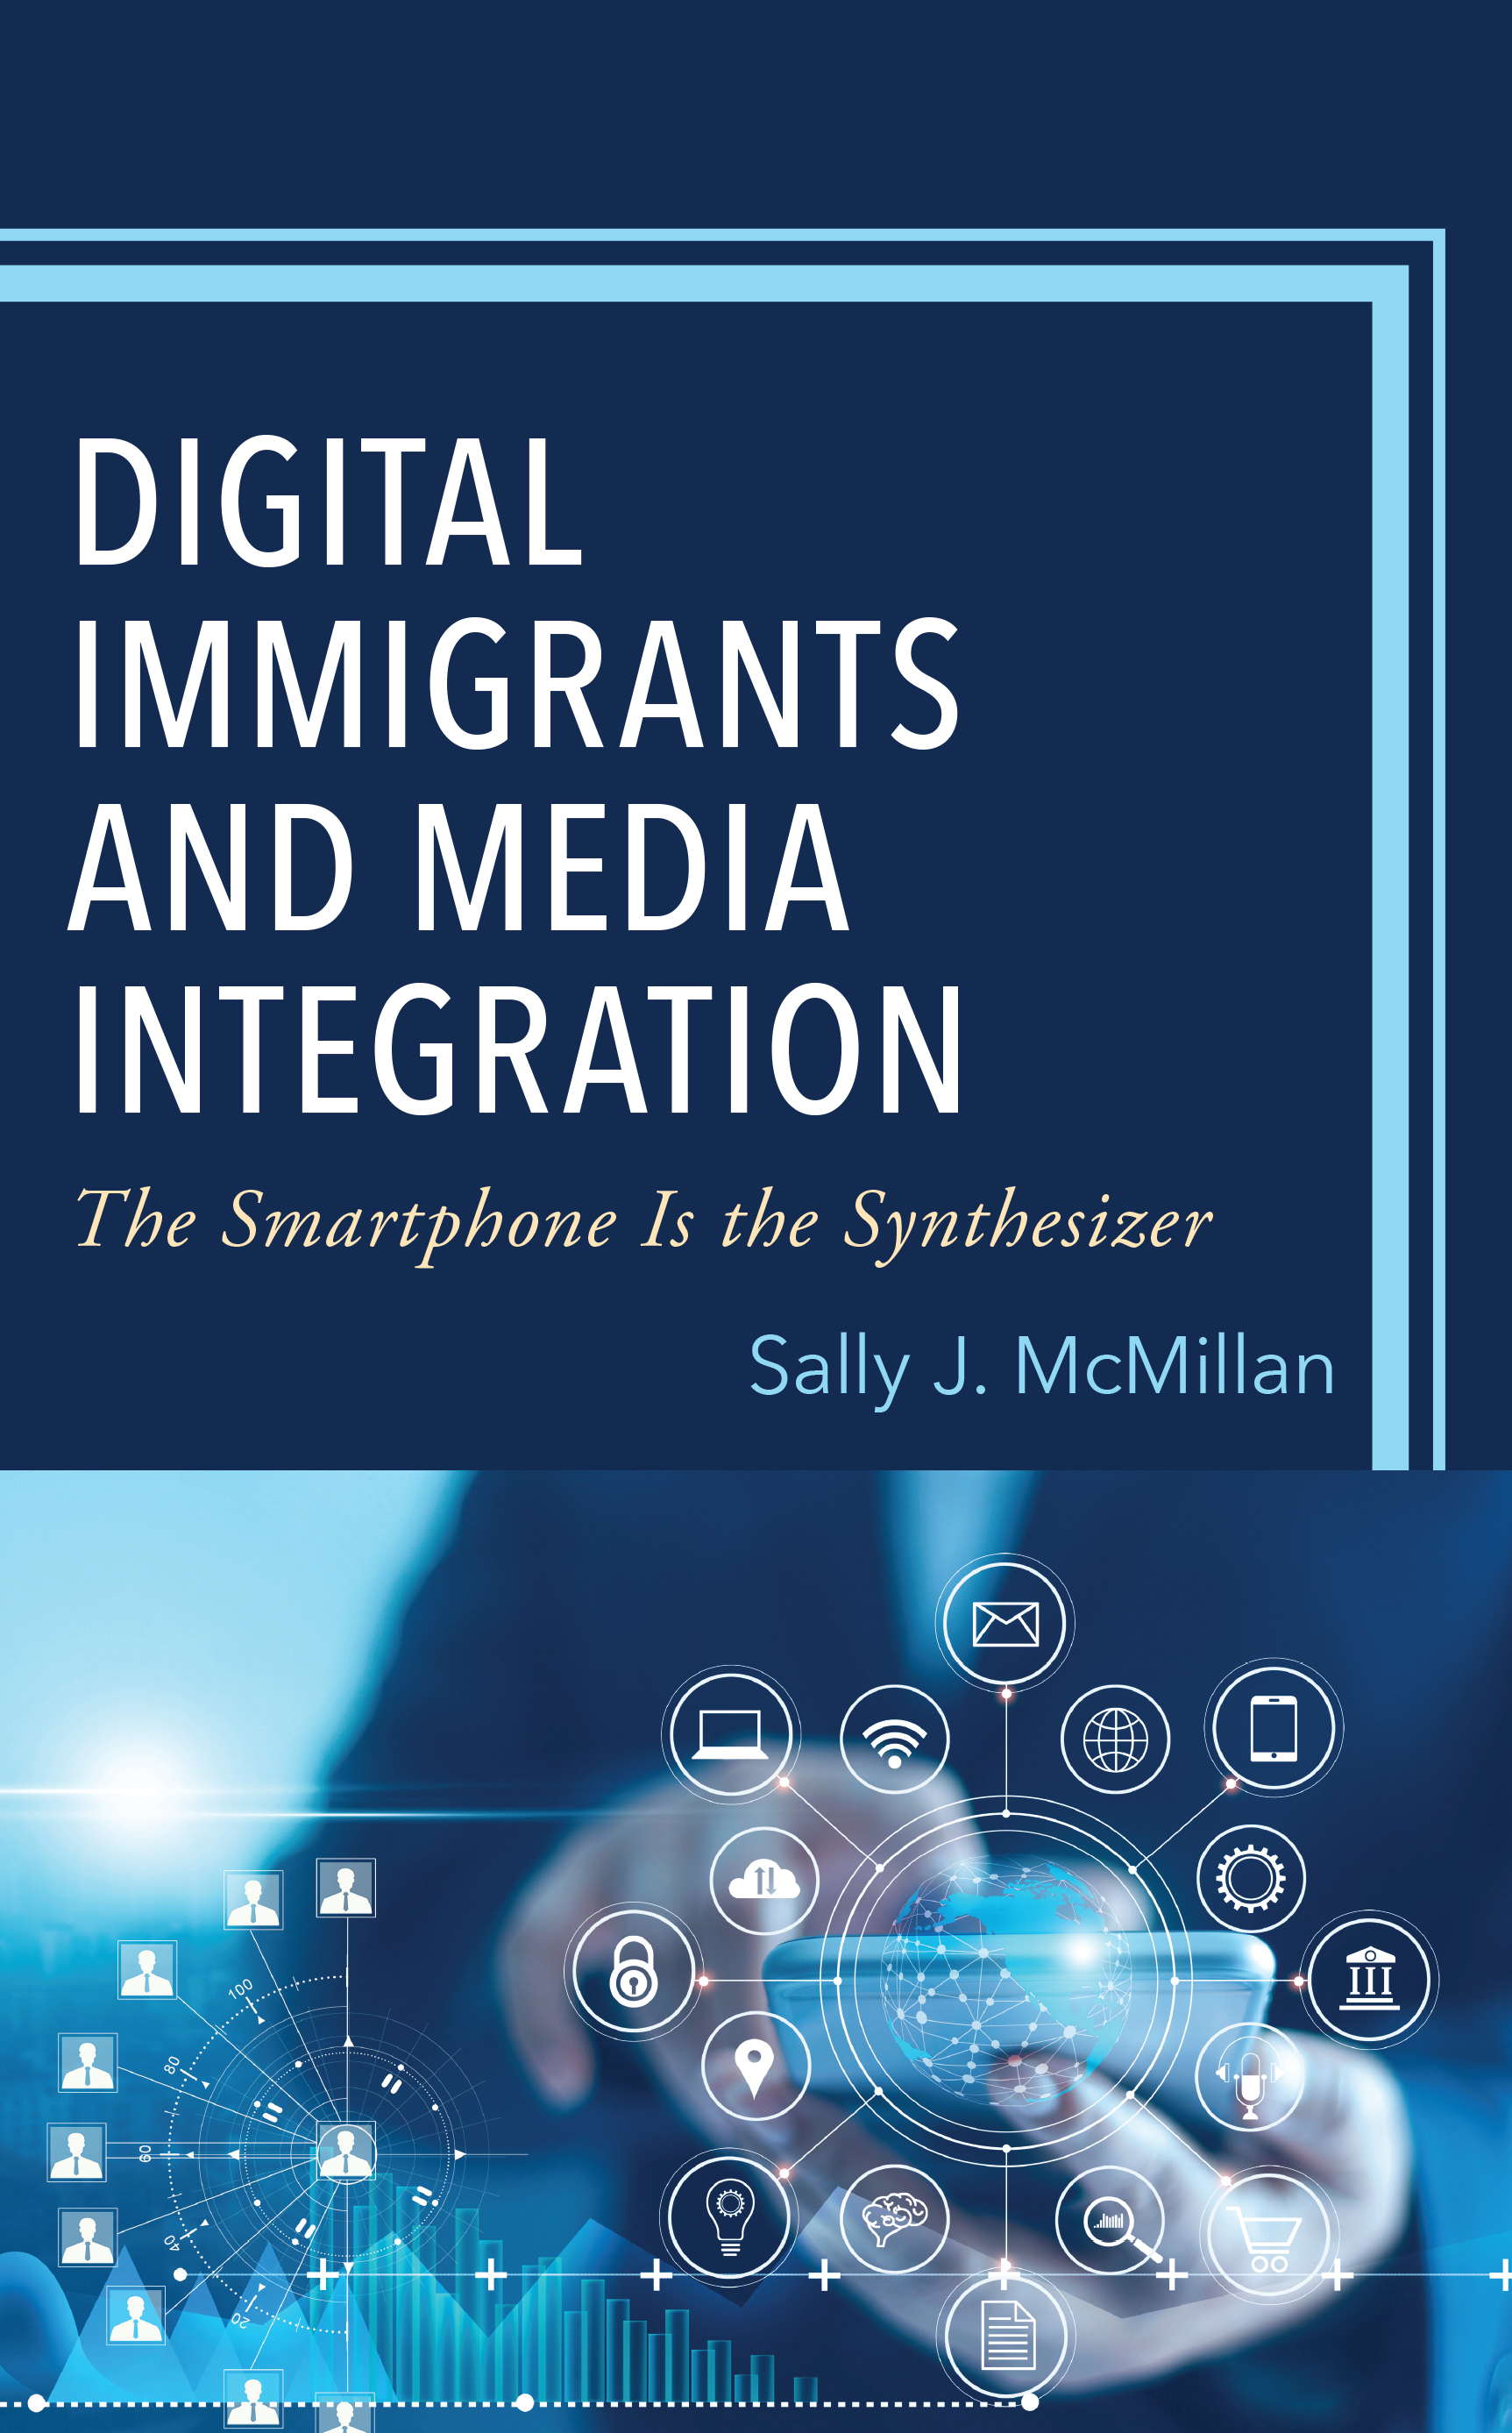 Digital Immigrants and Media Integration: The Smartphone Is the Synthesizer